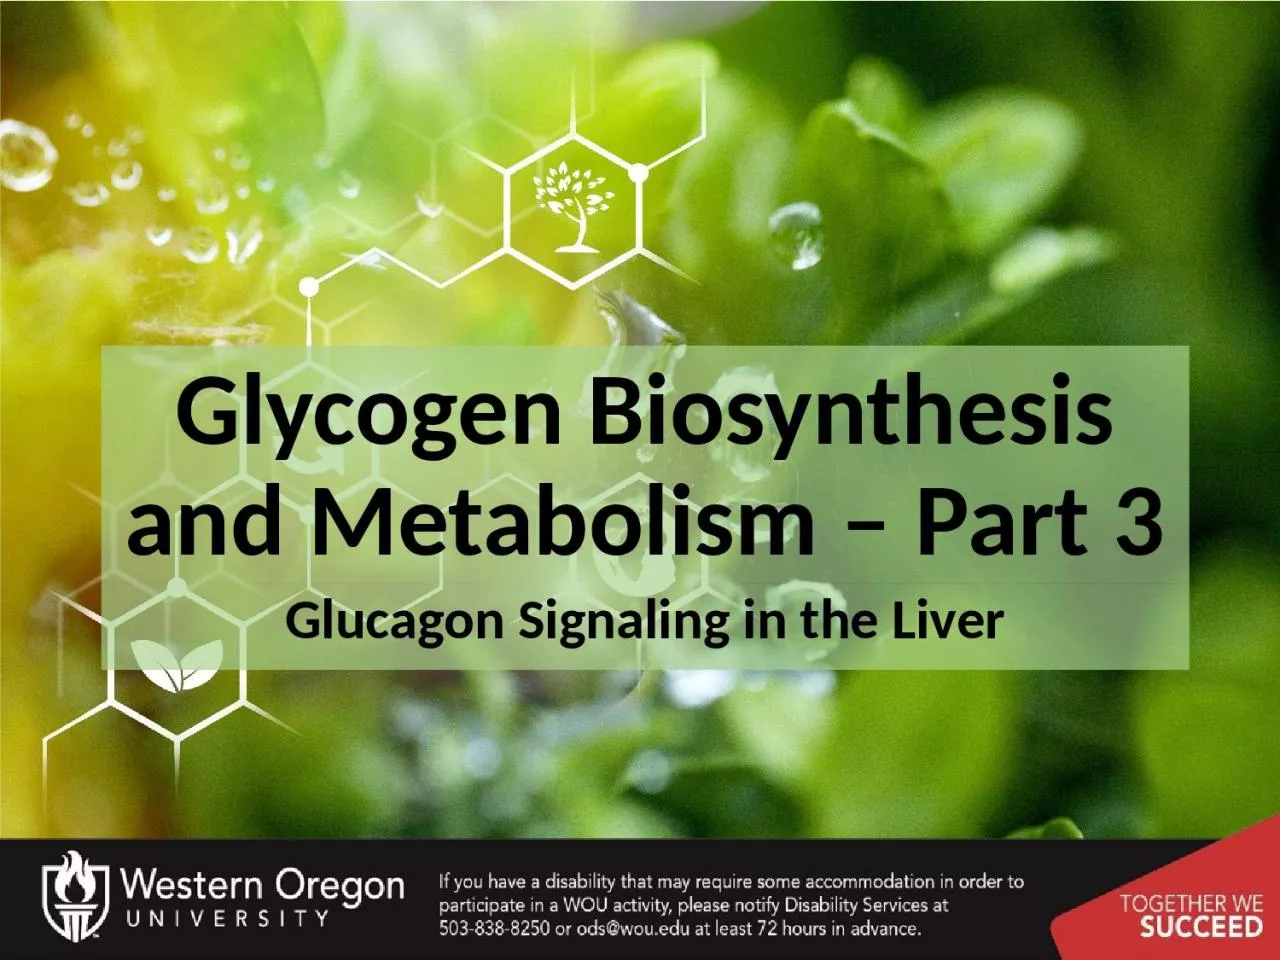 Glycogen Biosynthesis and Metabolism – Part 3